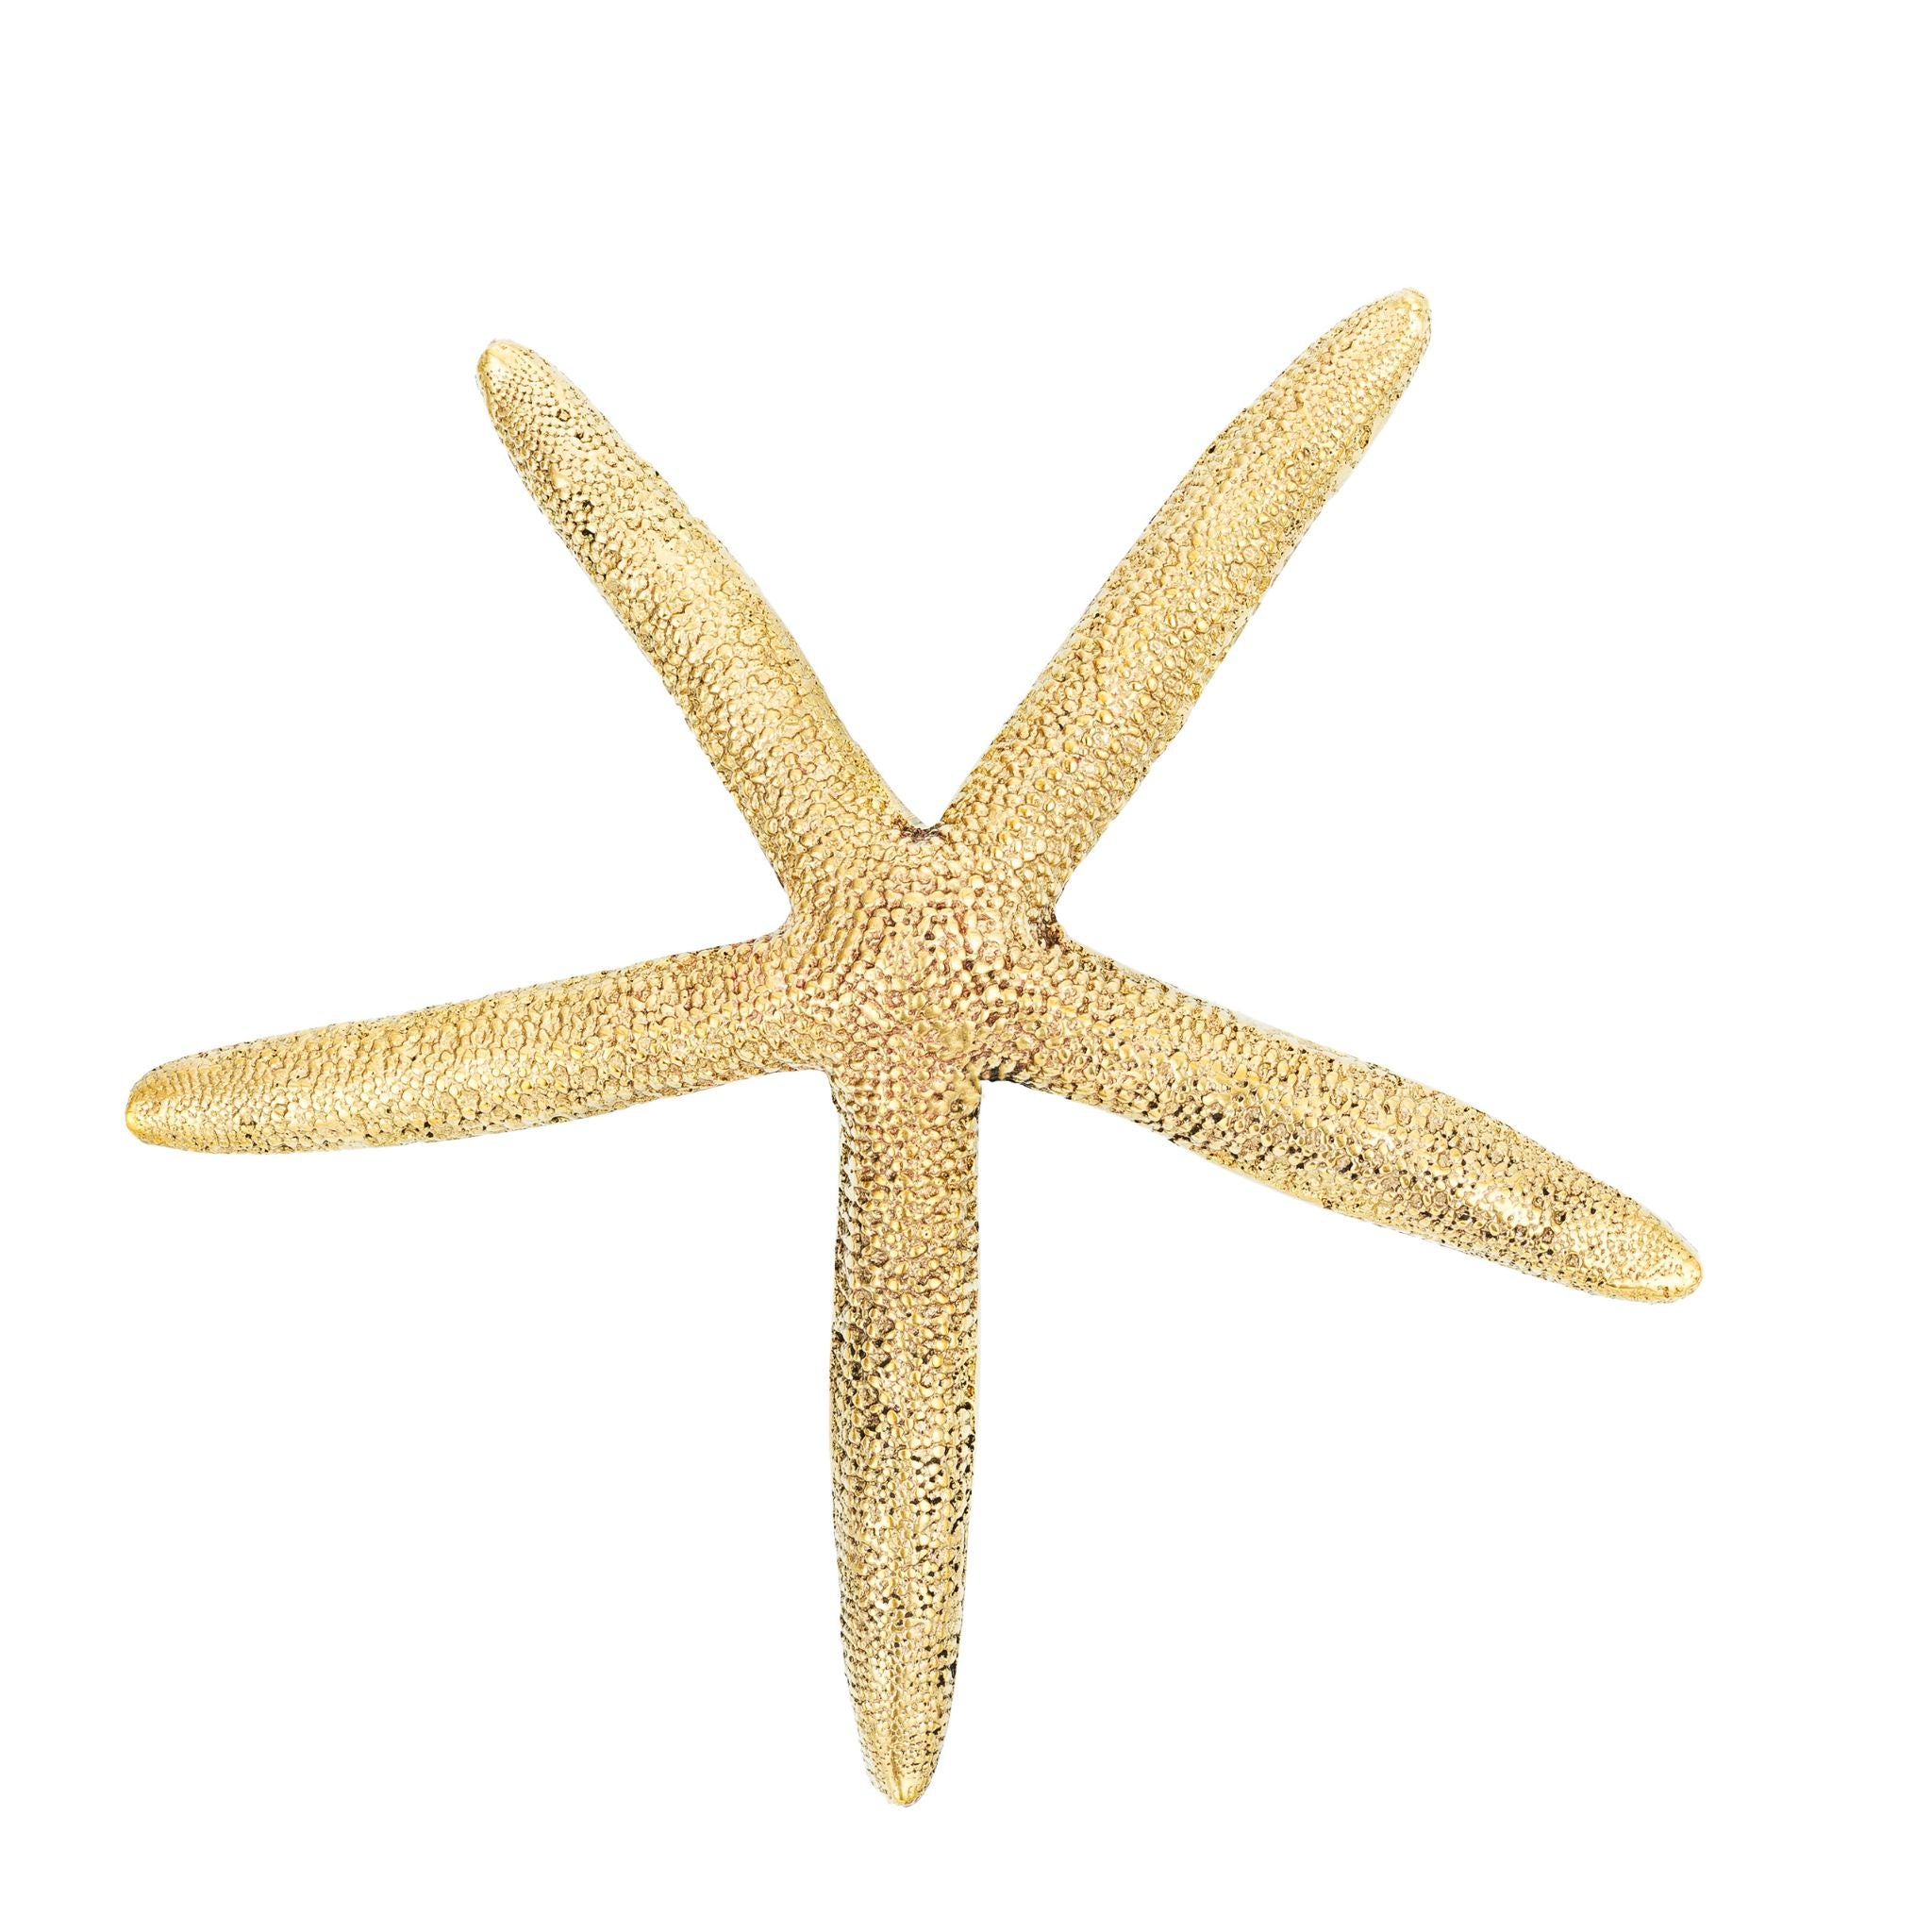 Medium-sized brass cabinet knob shaped like a starfish, ideal for adding a coastal touch to furniture and cabinets.